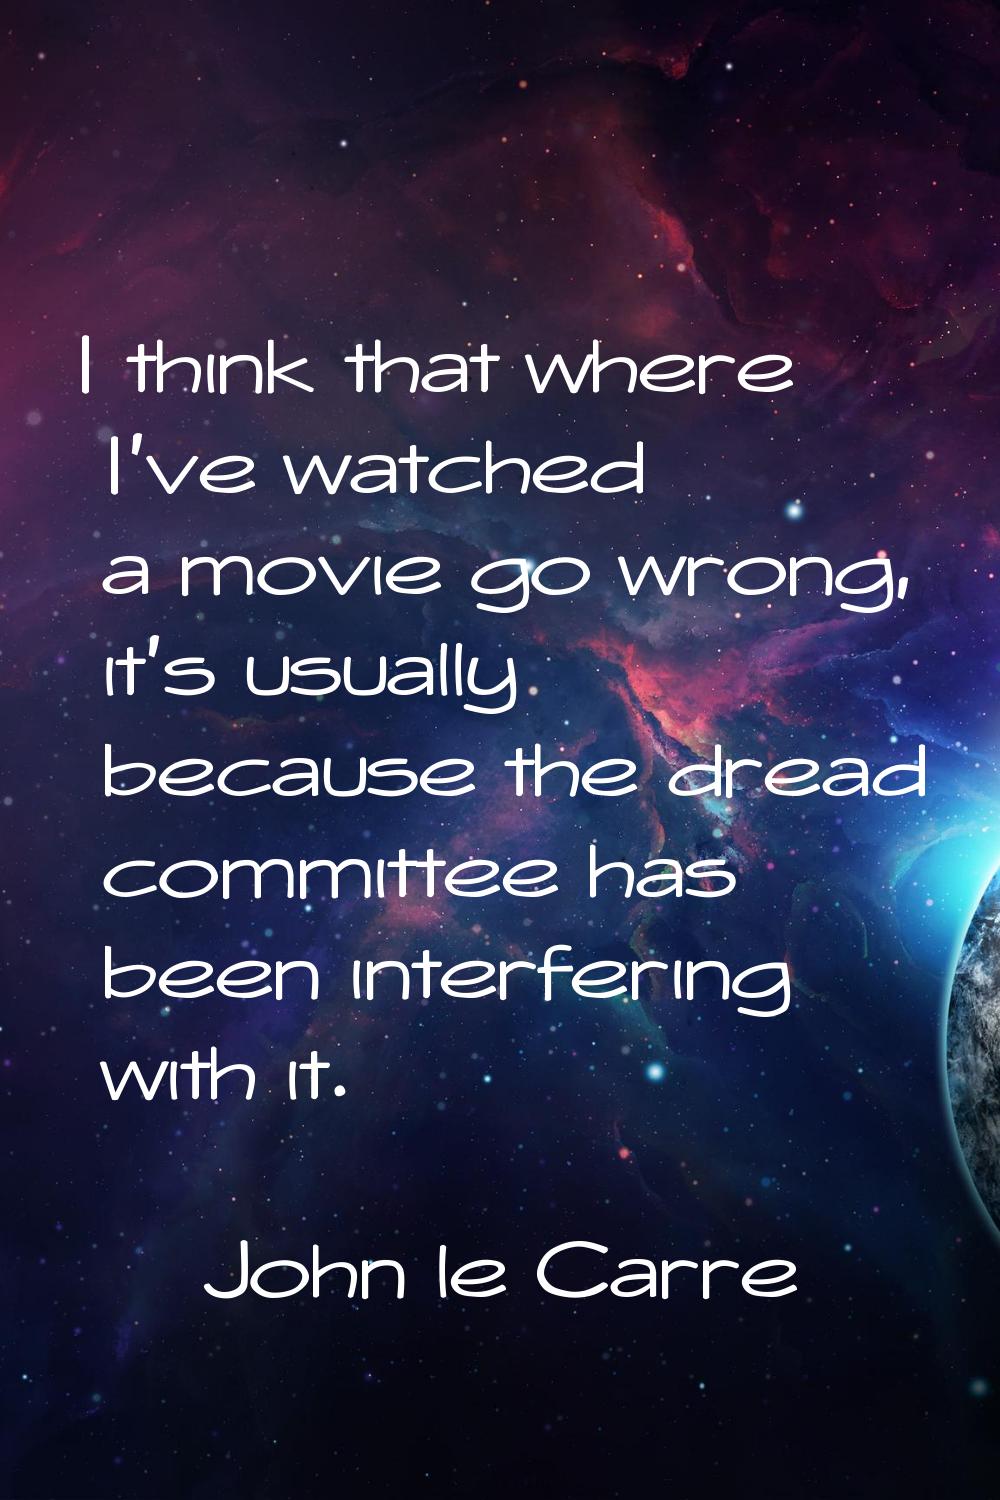 I think that where I've watched a movie go wrong, it's usually because the dread committee has been